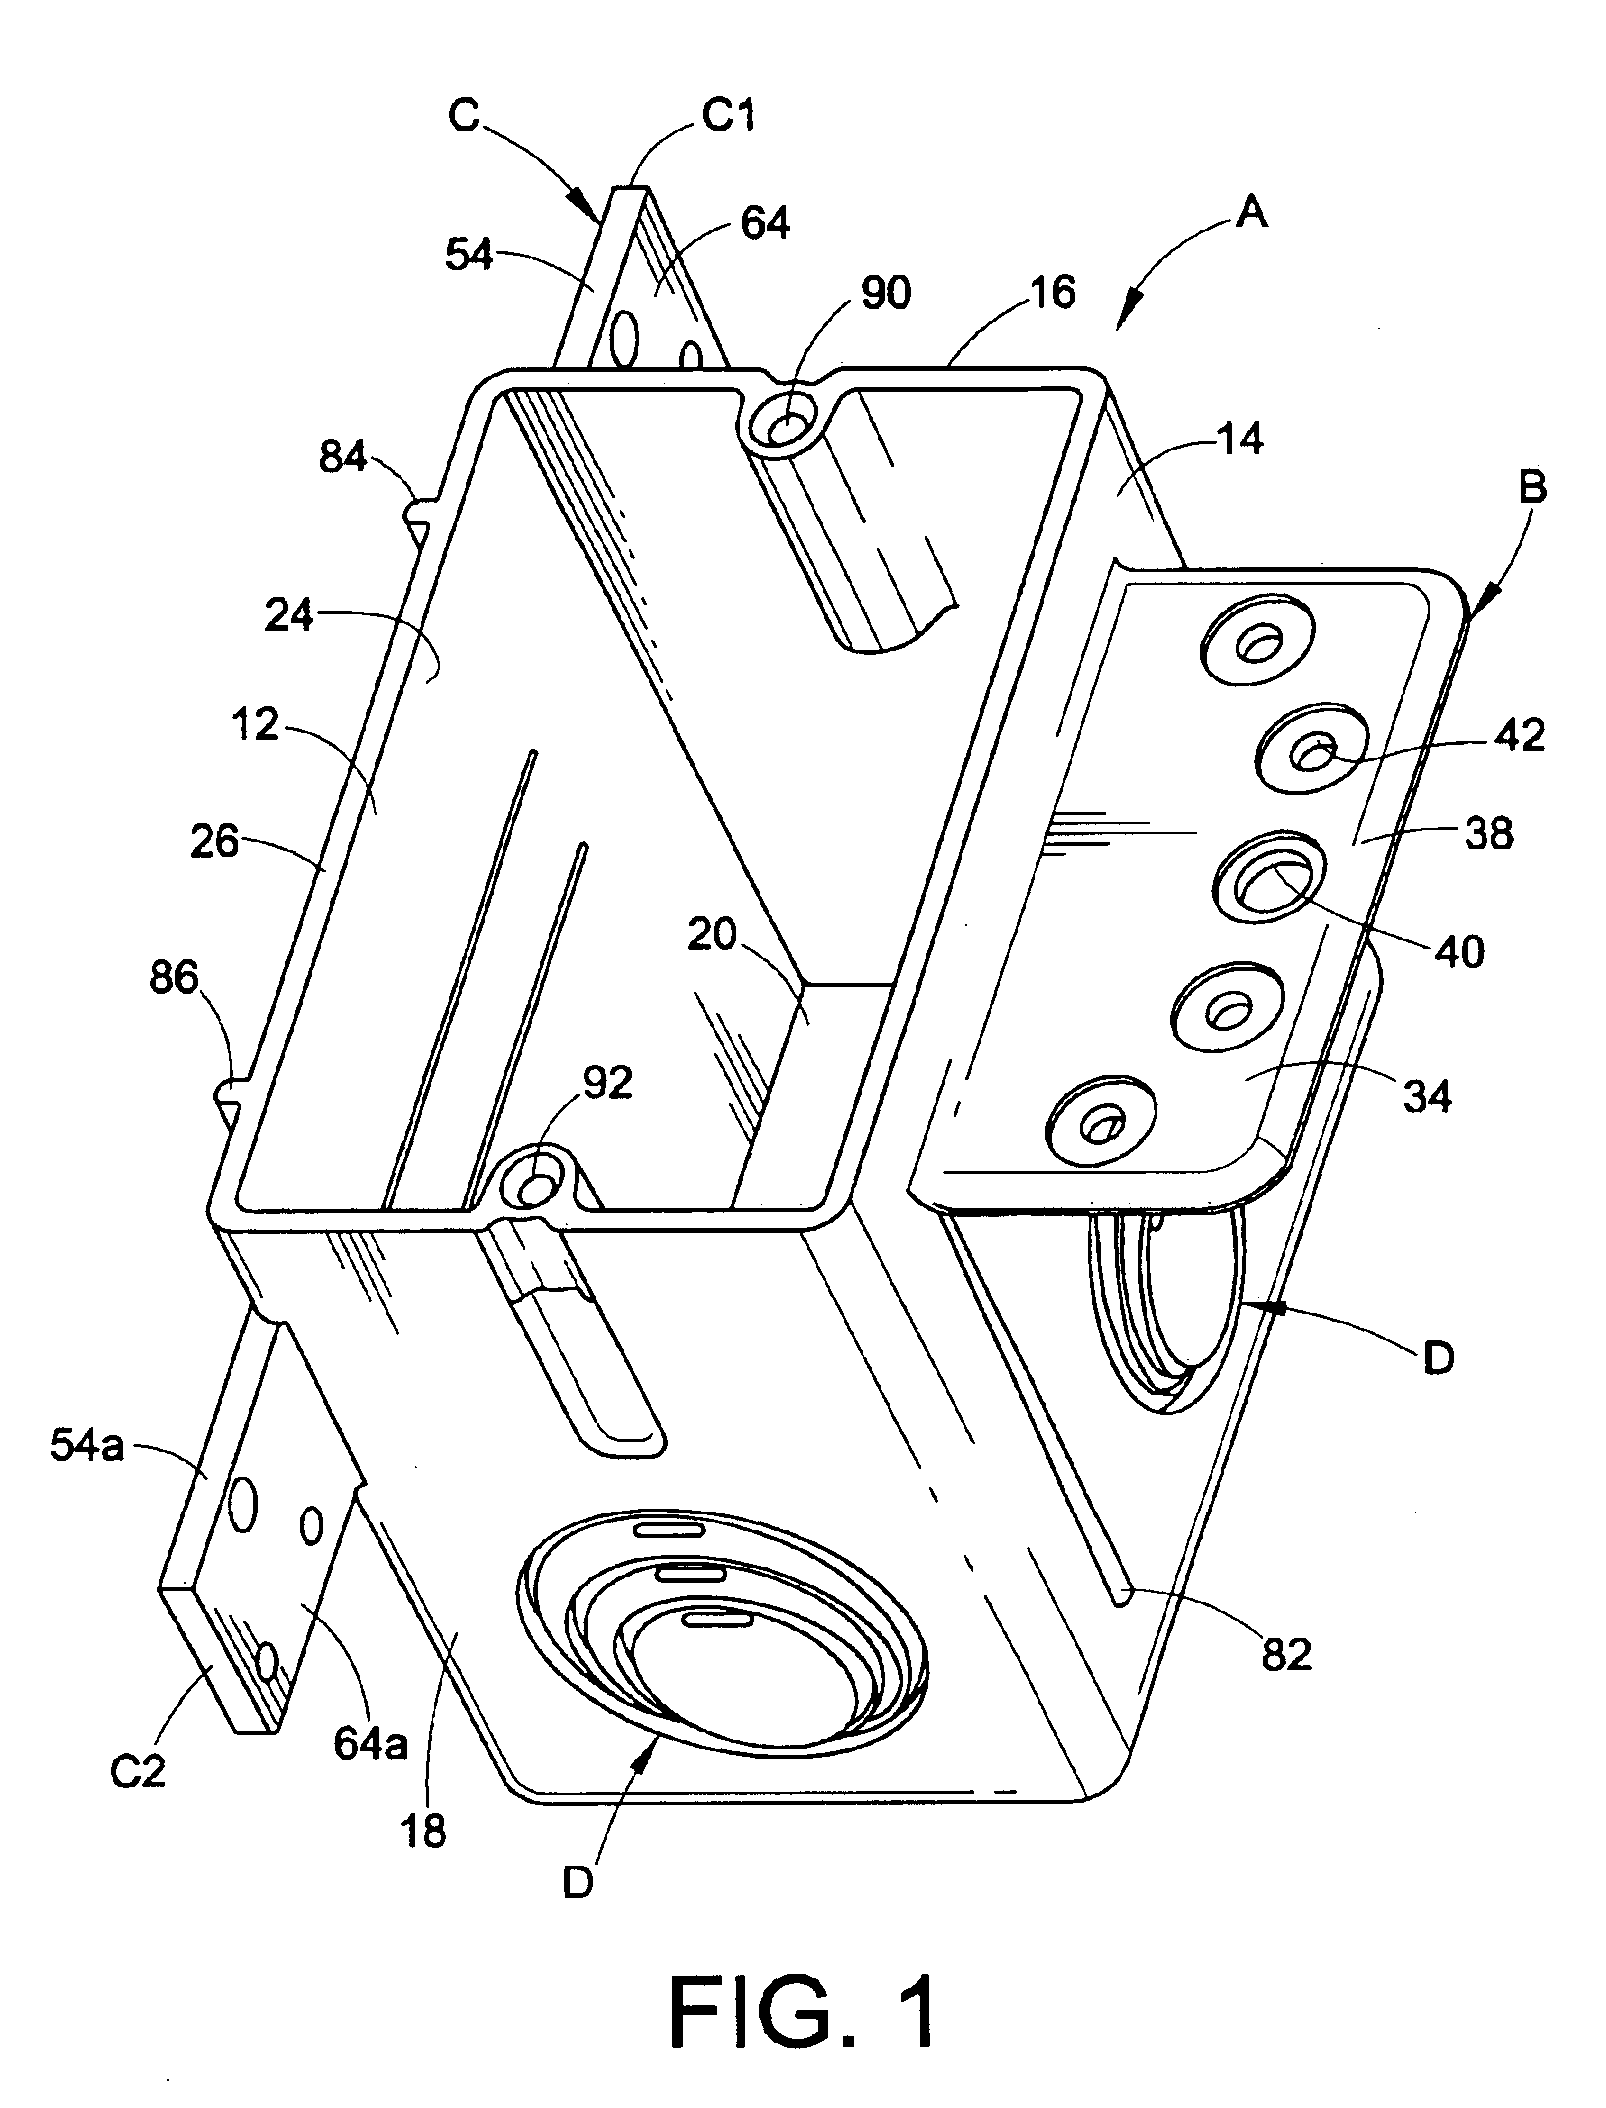 Electrical outlet box with alternative mounting flanges